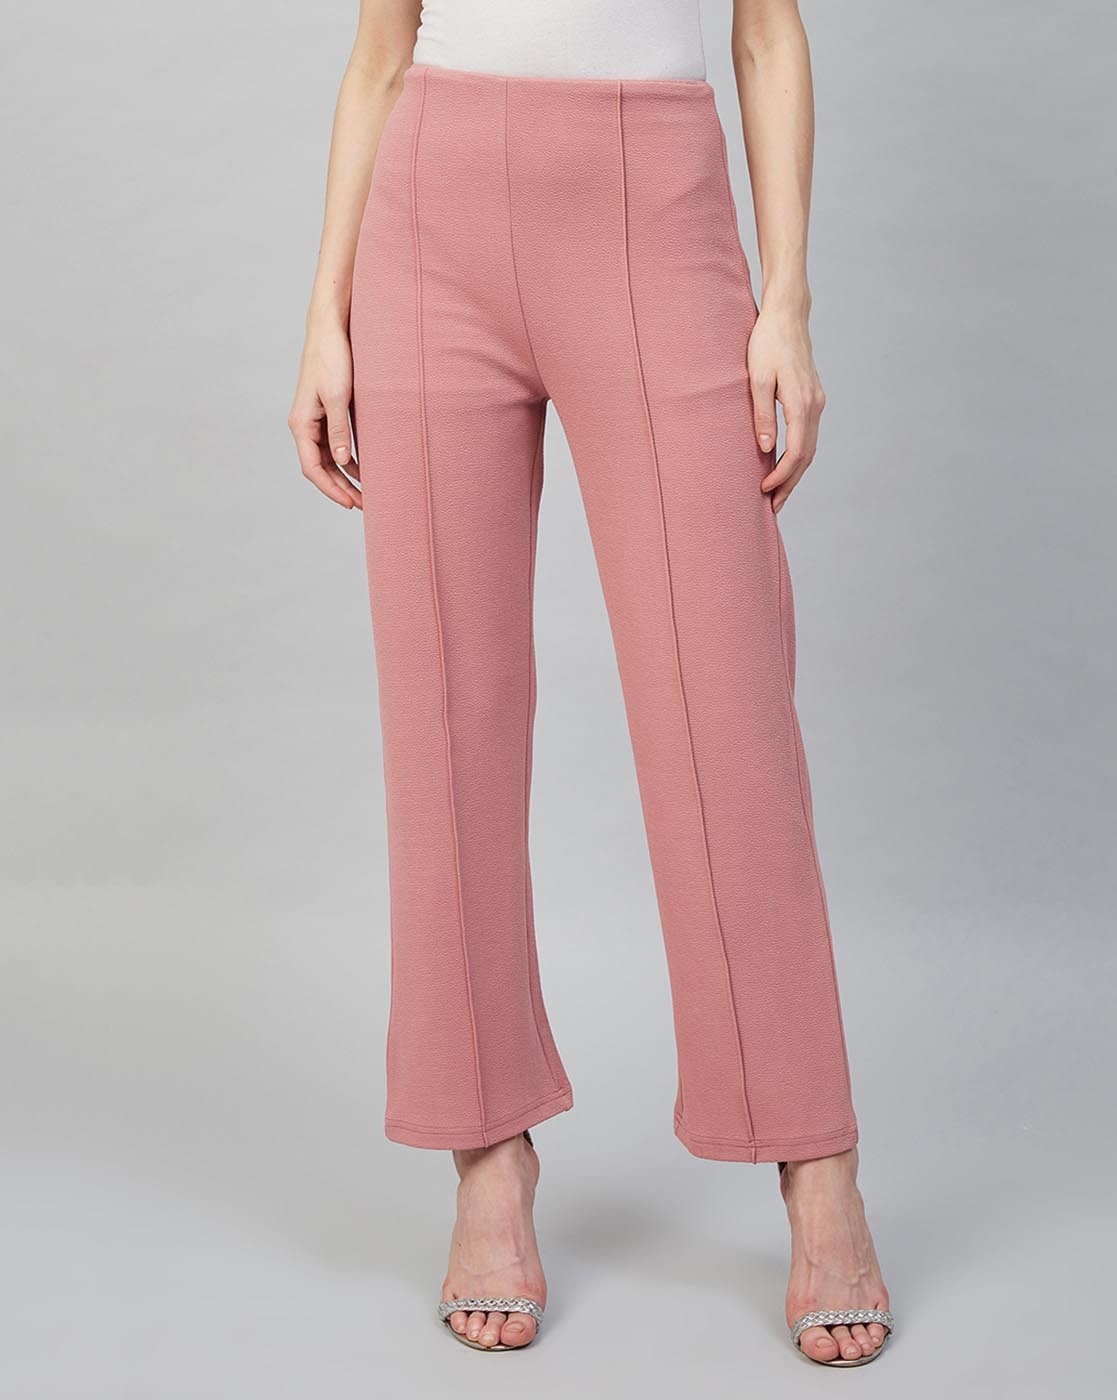 Buy Pink Ankle Length Pant Cotton Samray for Best Price Reviews Free  Shipping